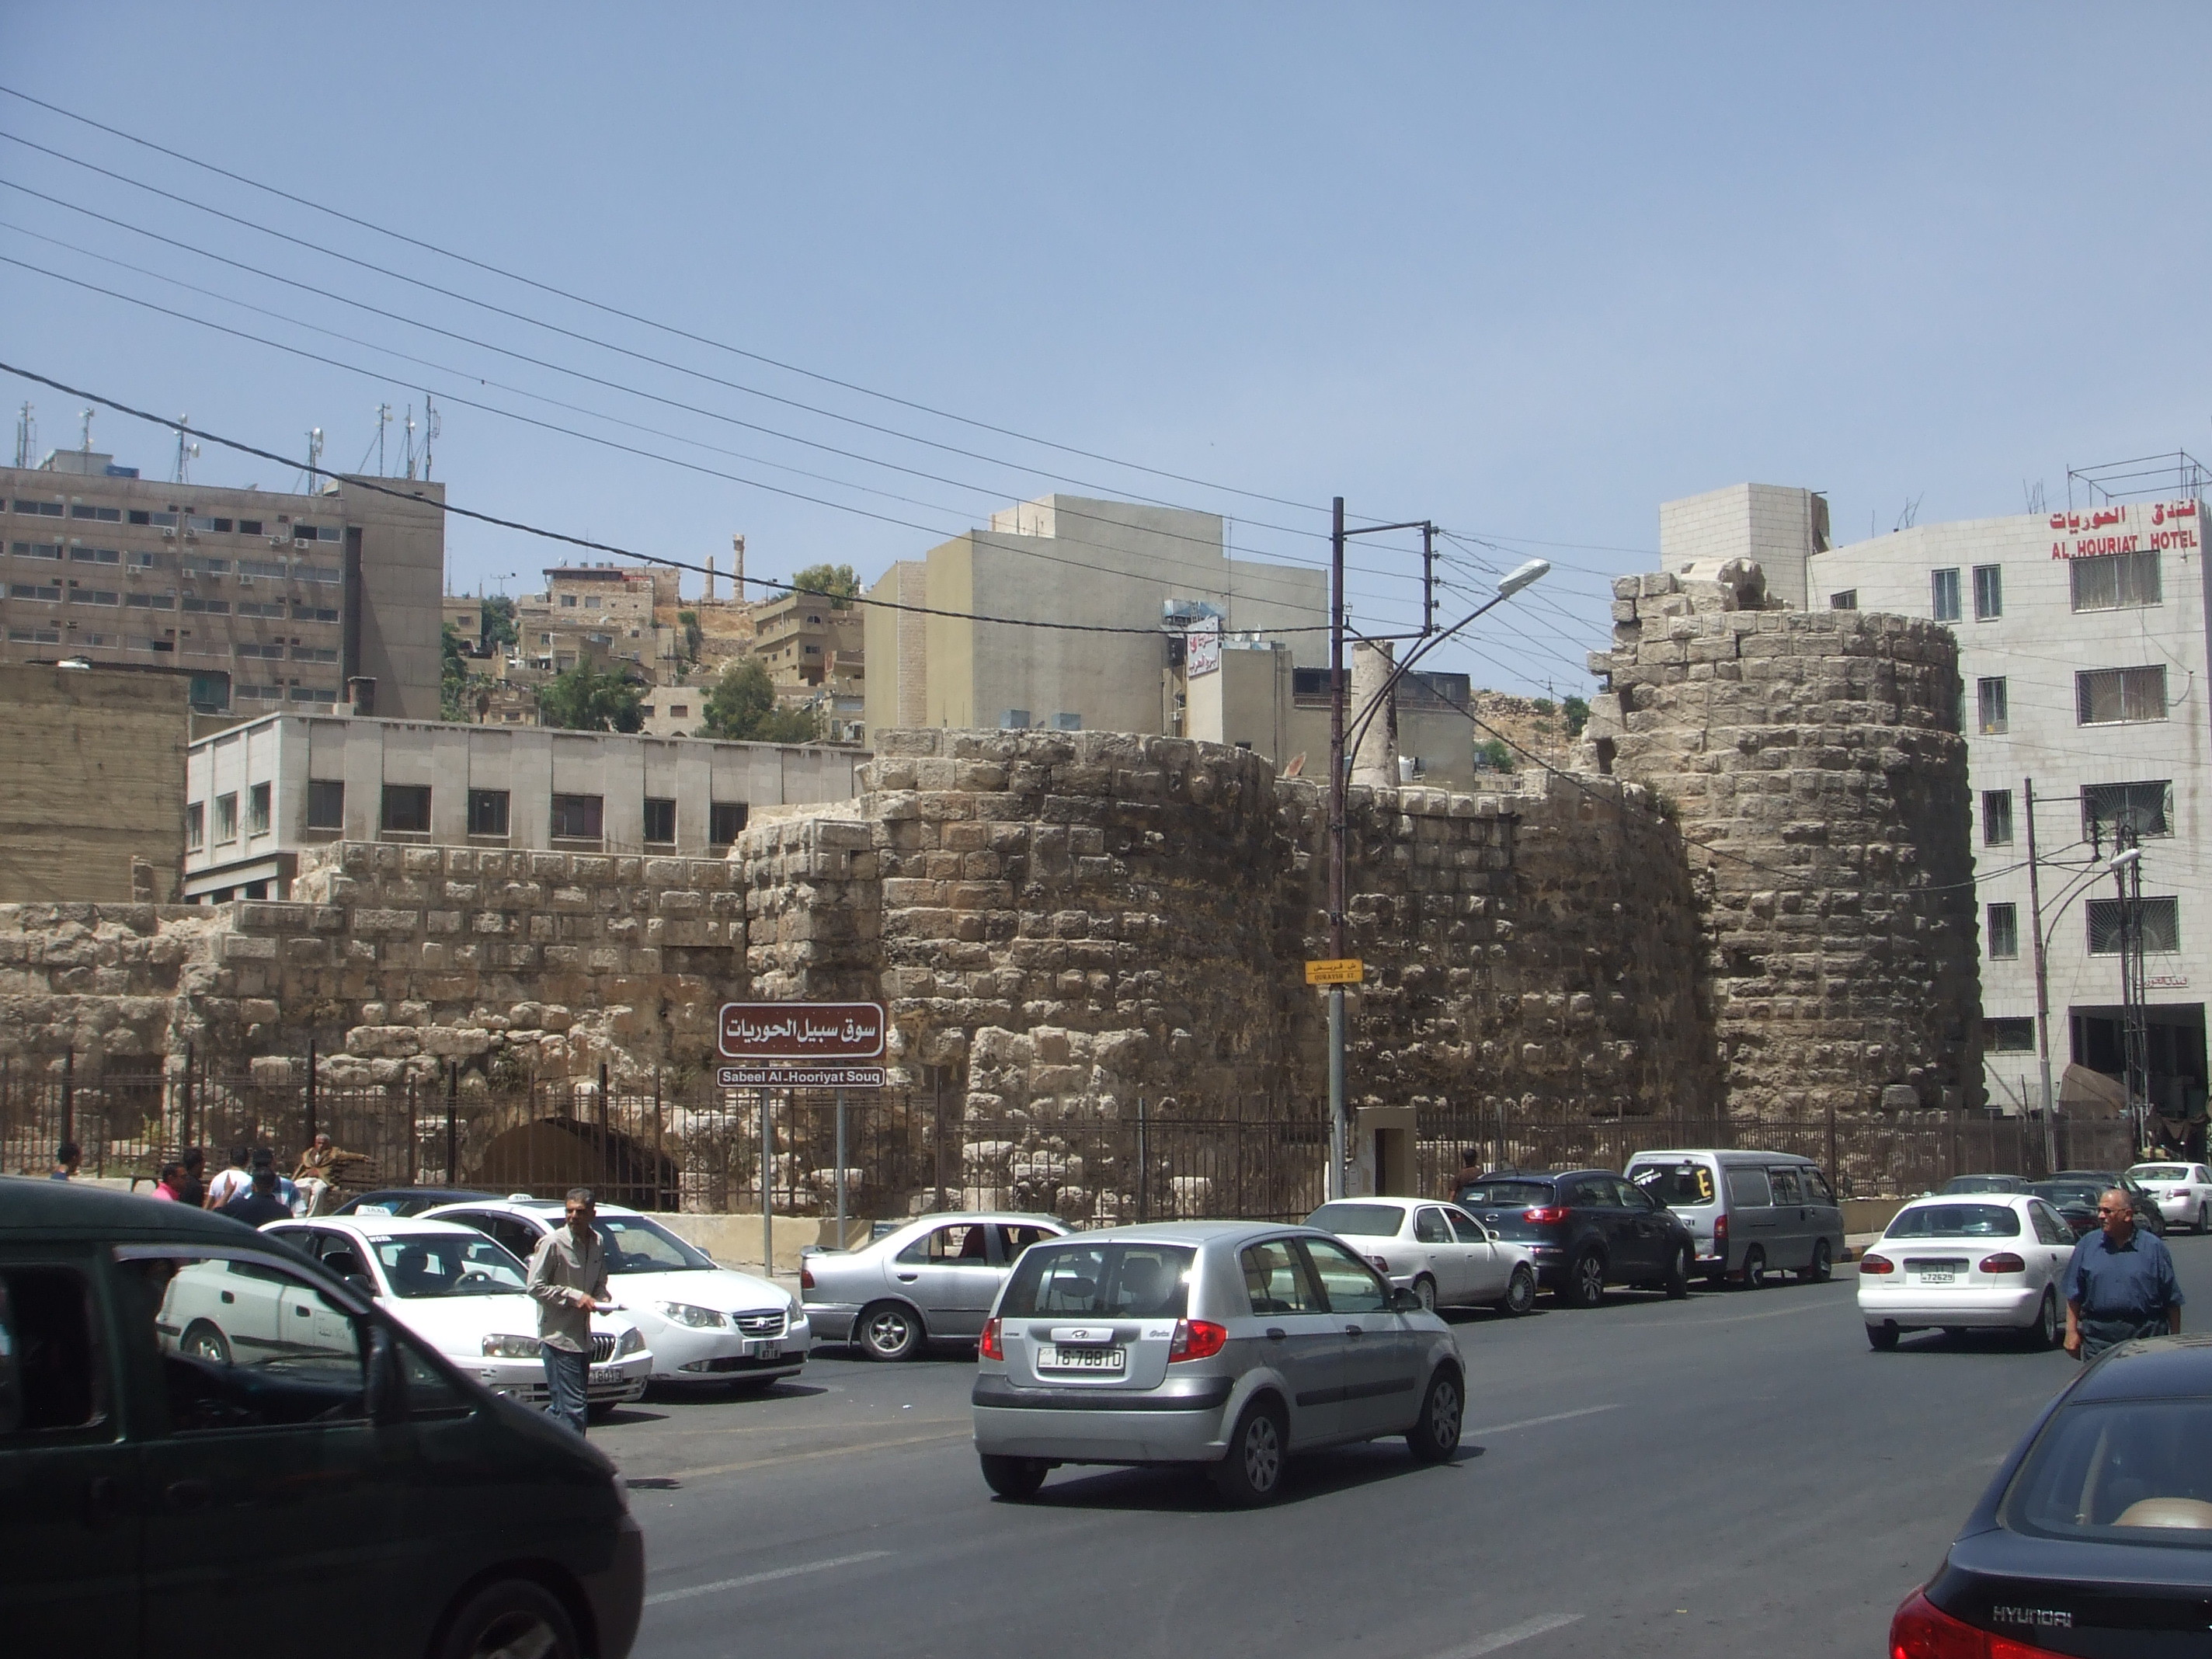 Nymphaeum, Amman Remains of an ancient Roman Nymphaeum (fountain basin with an ornamental rear wall) can be found at the end of one of the side streets of central Amman.